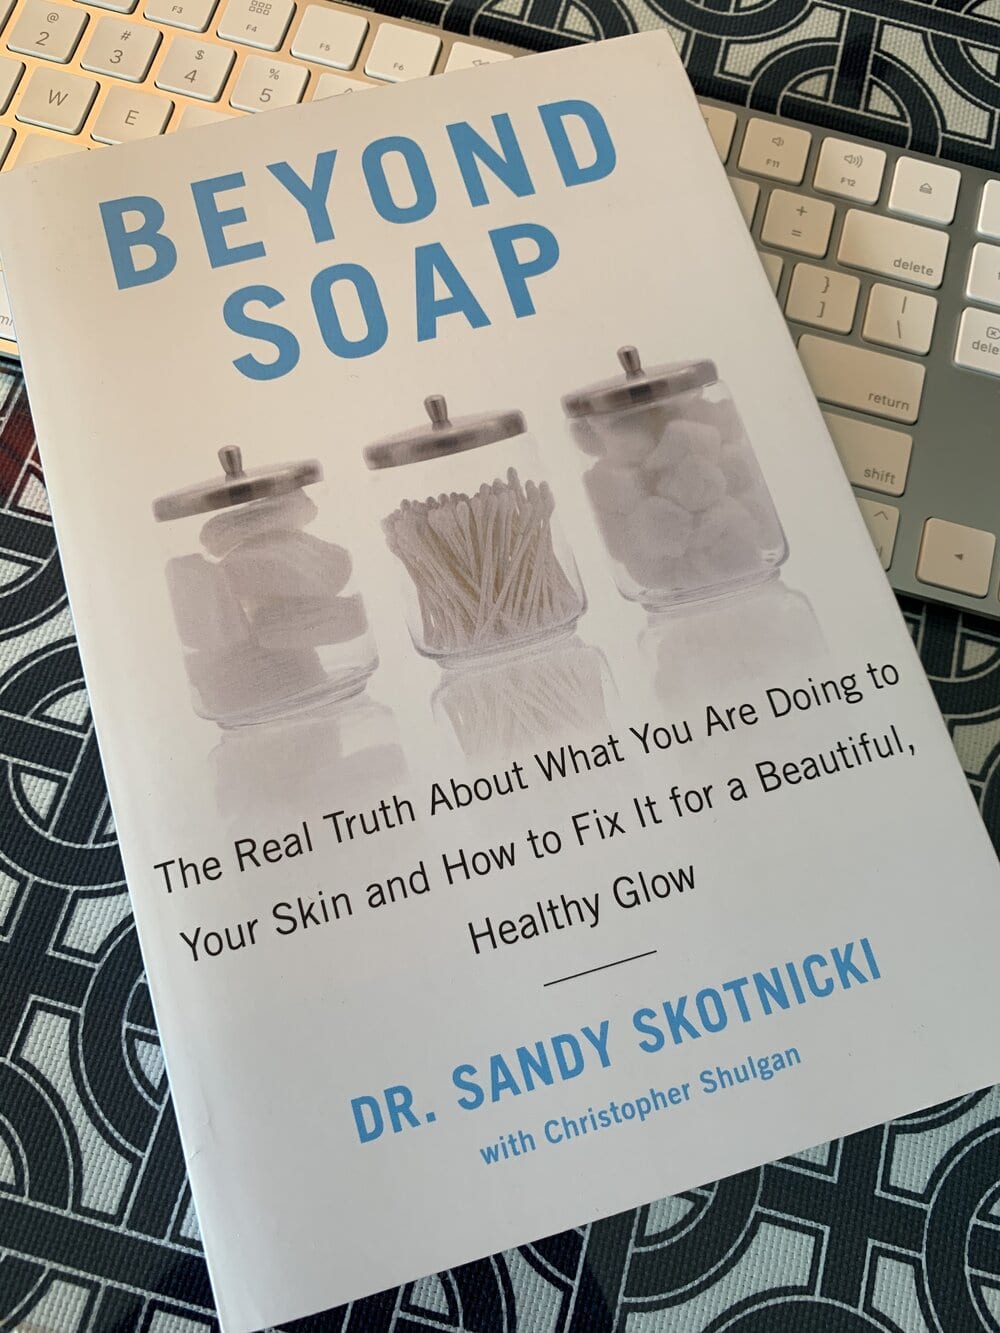 Photo of book, Beyond Soap - The Real Truth About What You Are Doing To Your skin and How to Fix It for a Beautiful Healthy Glow written by dermatologist Dr. Sandy Skotnicki